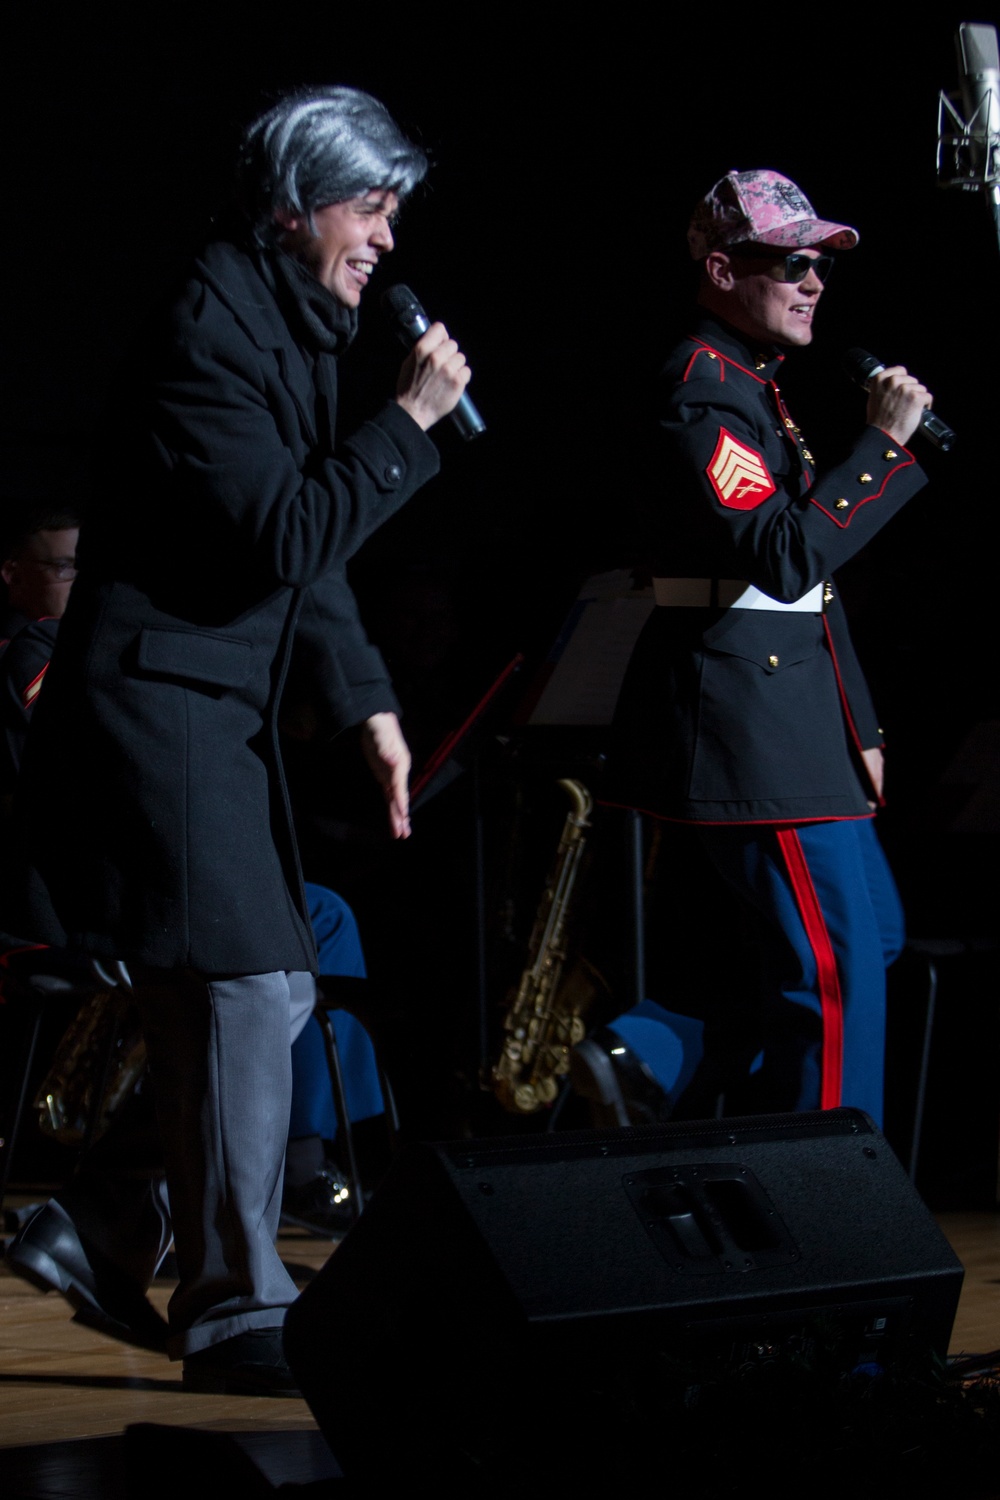 III MEF Band kicks off their Christmas Concert Series in Kin Town